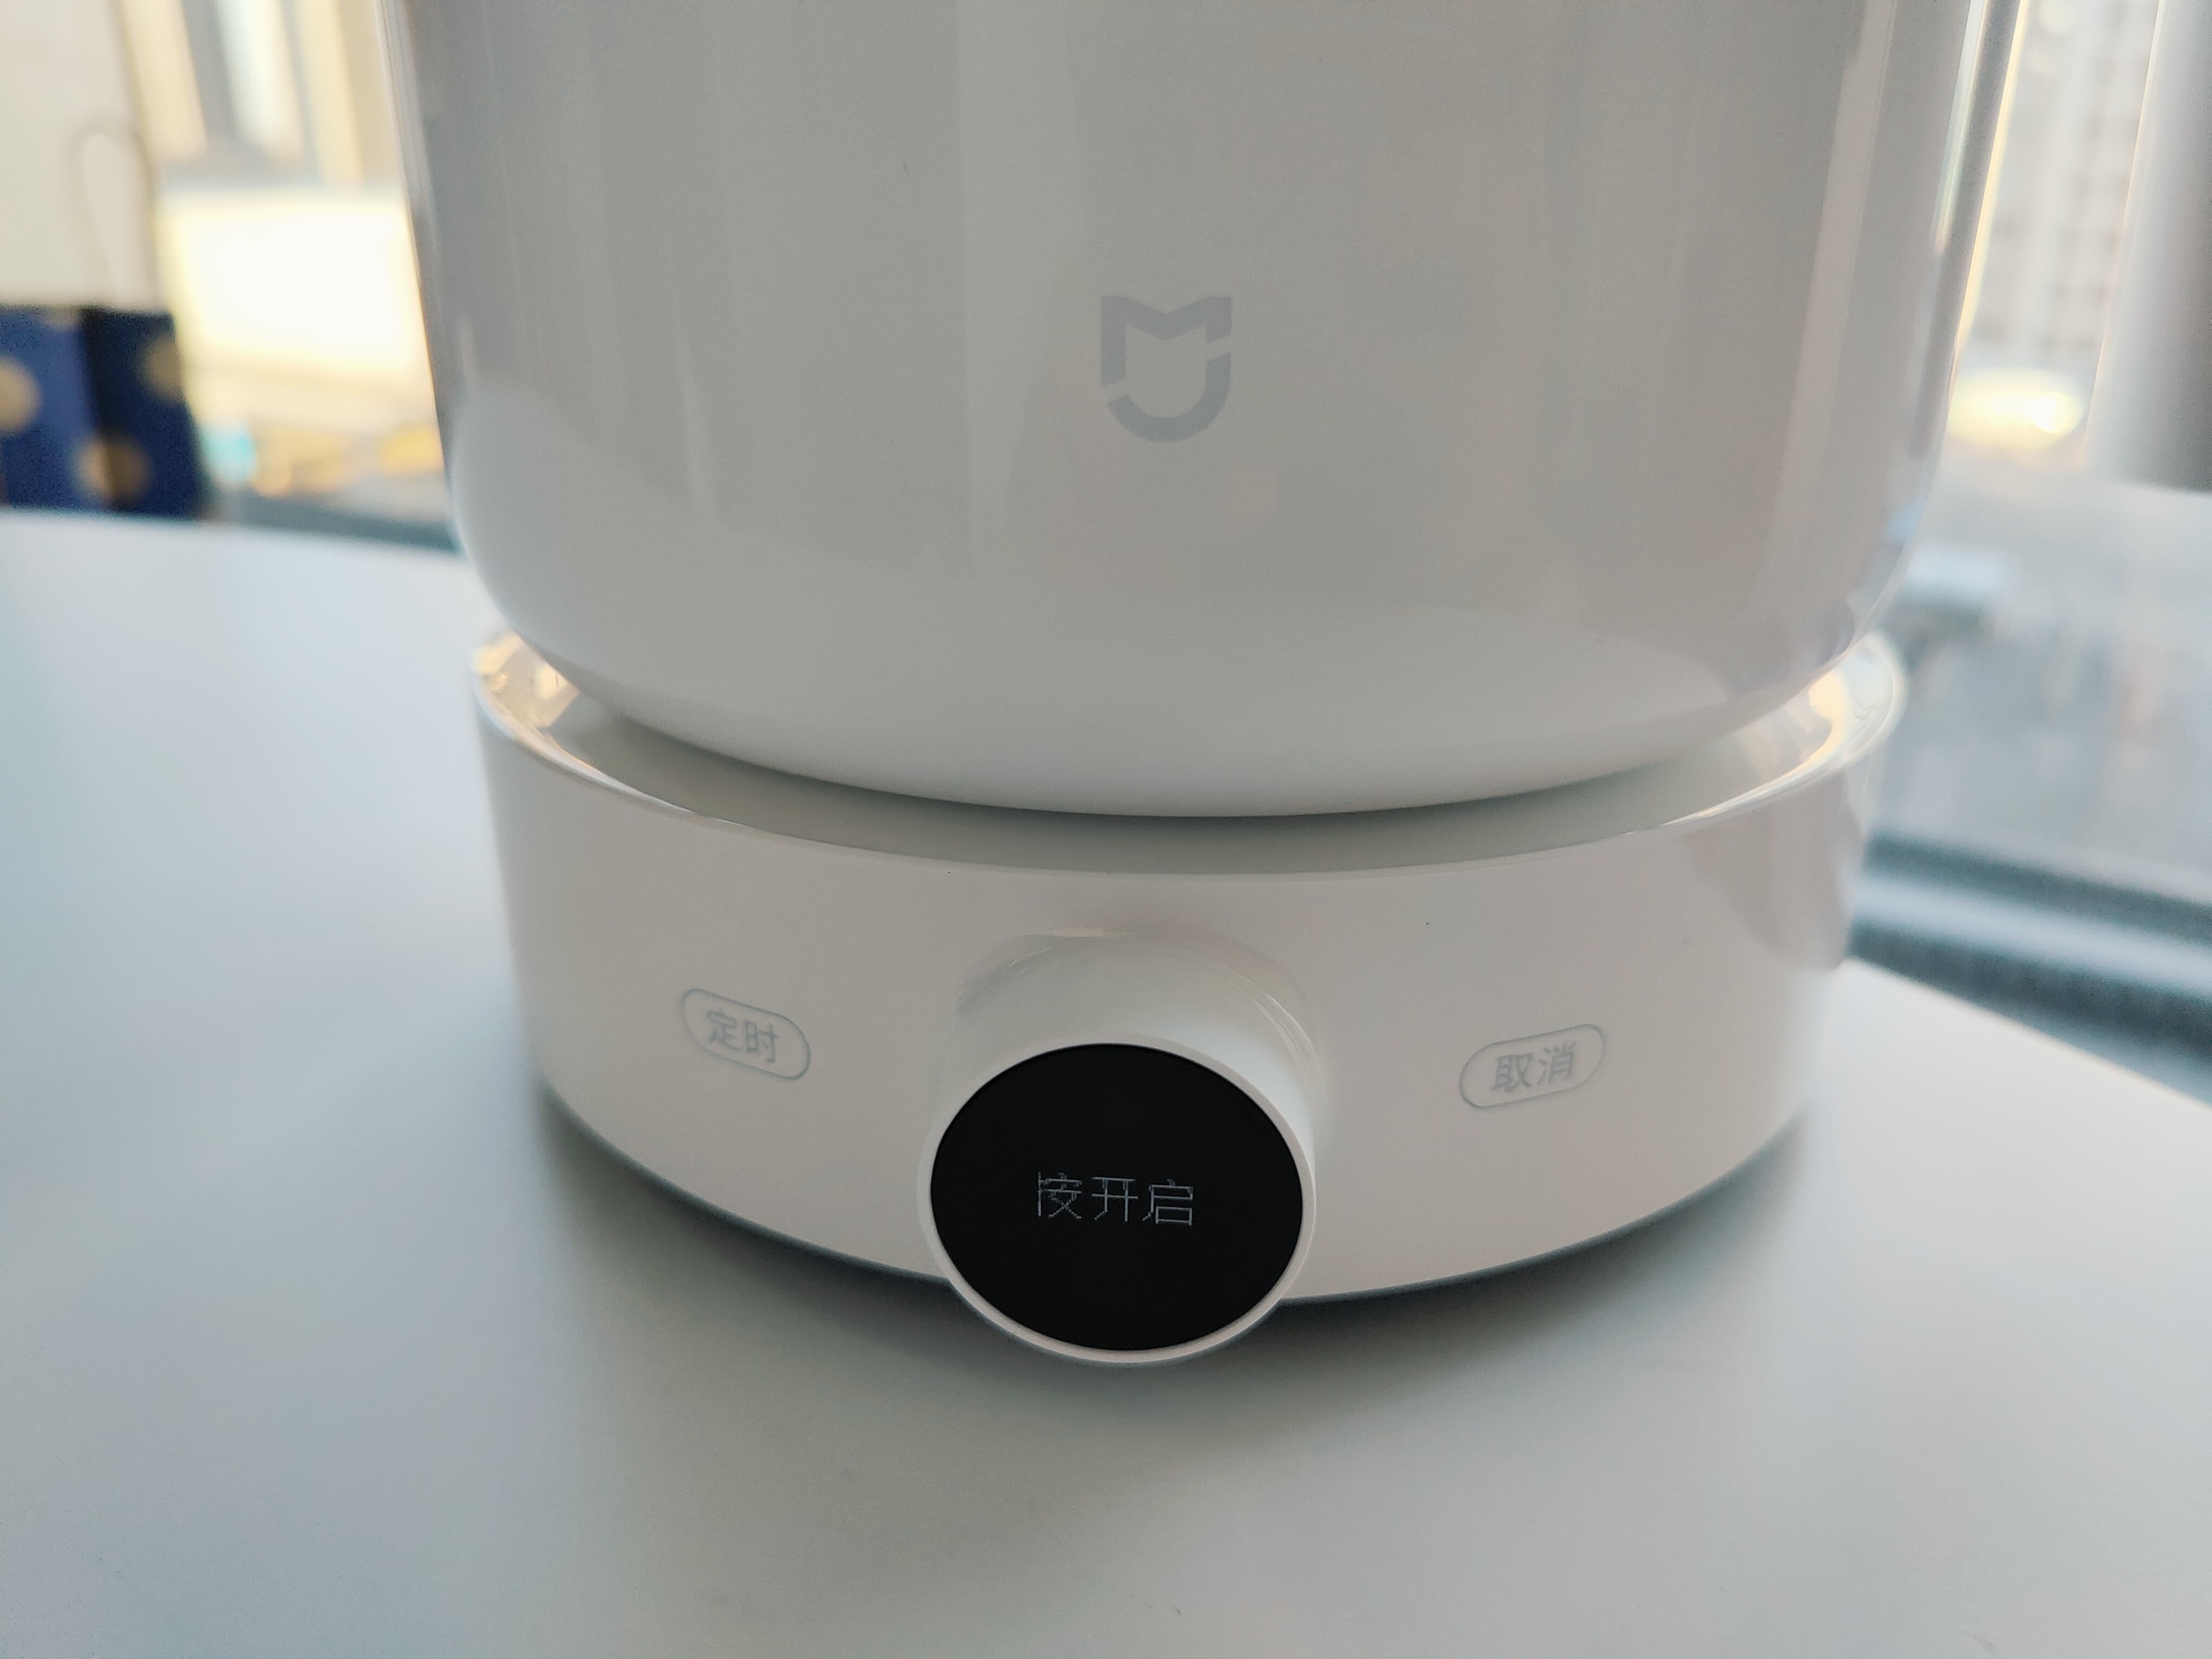 Unboxing of Mijia Smart Multi-function Cooking Pot: Eating a good bowl of rice is very important